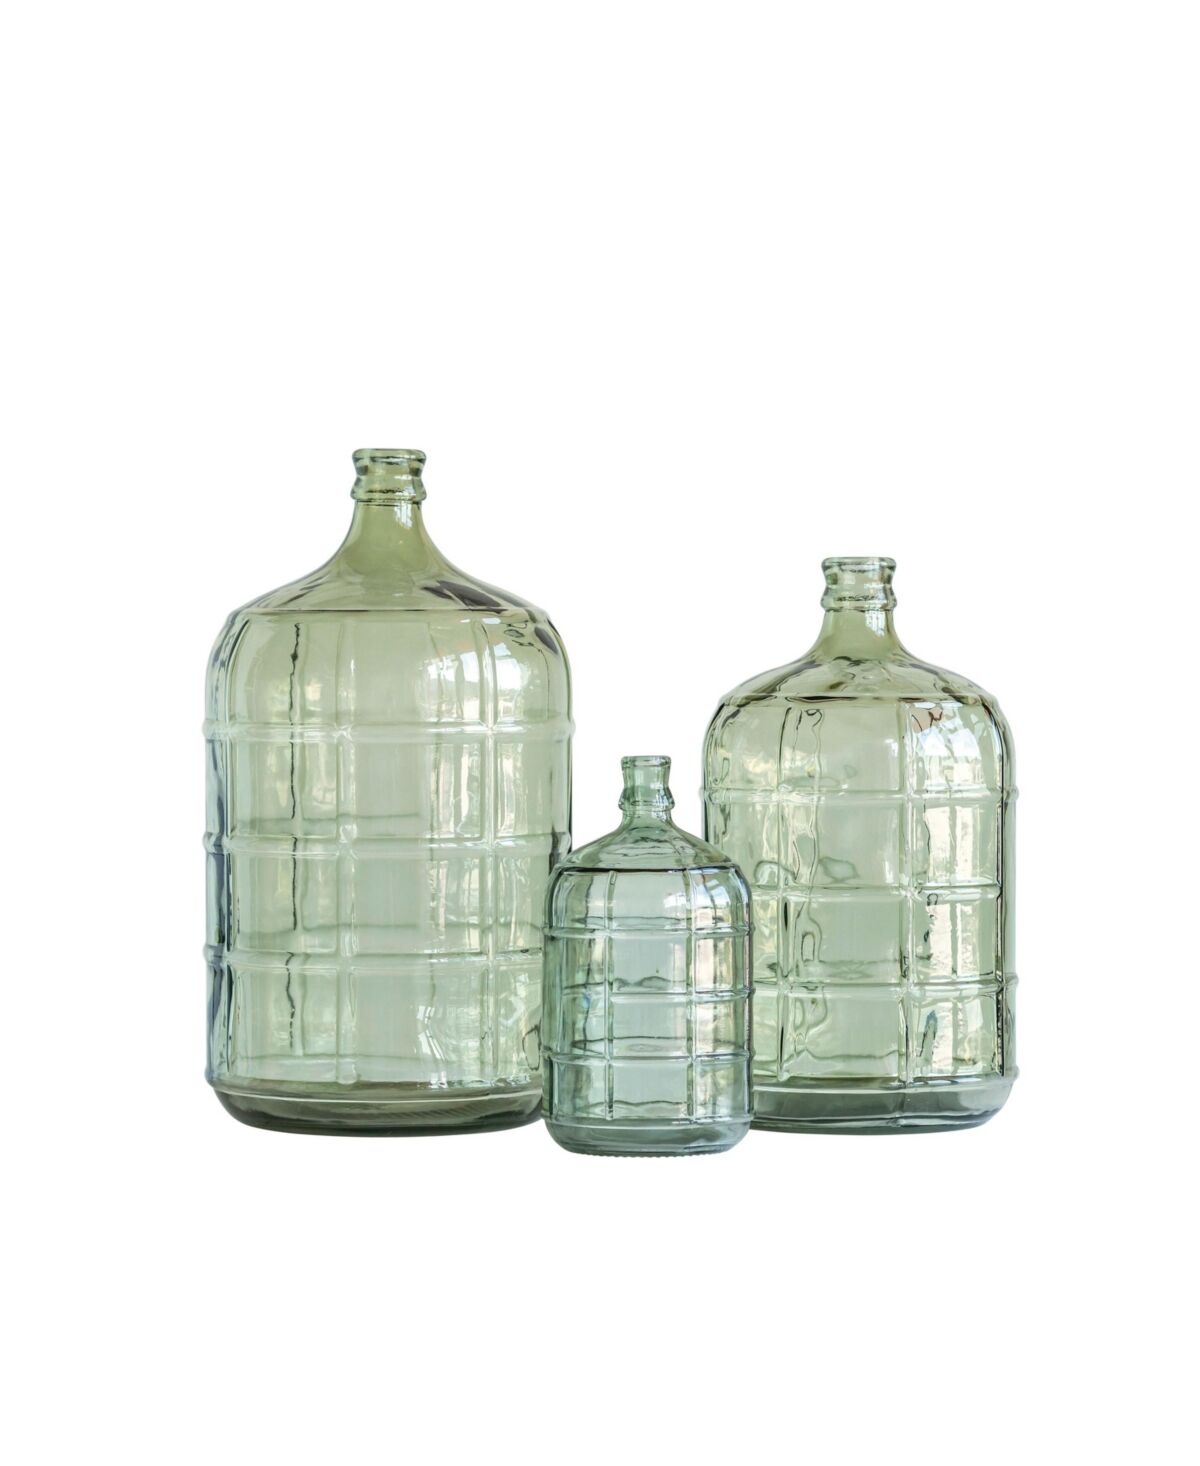 3r Studio Transparent Vintage-like Reproduction Glass Bottle with Embossed Windowpane Design, Green - Green